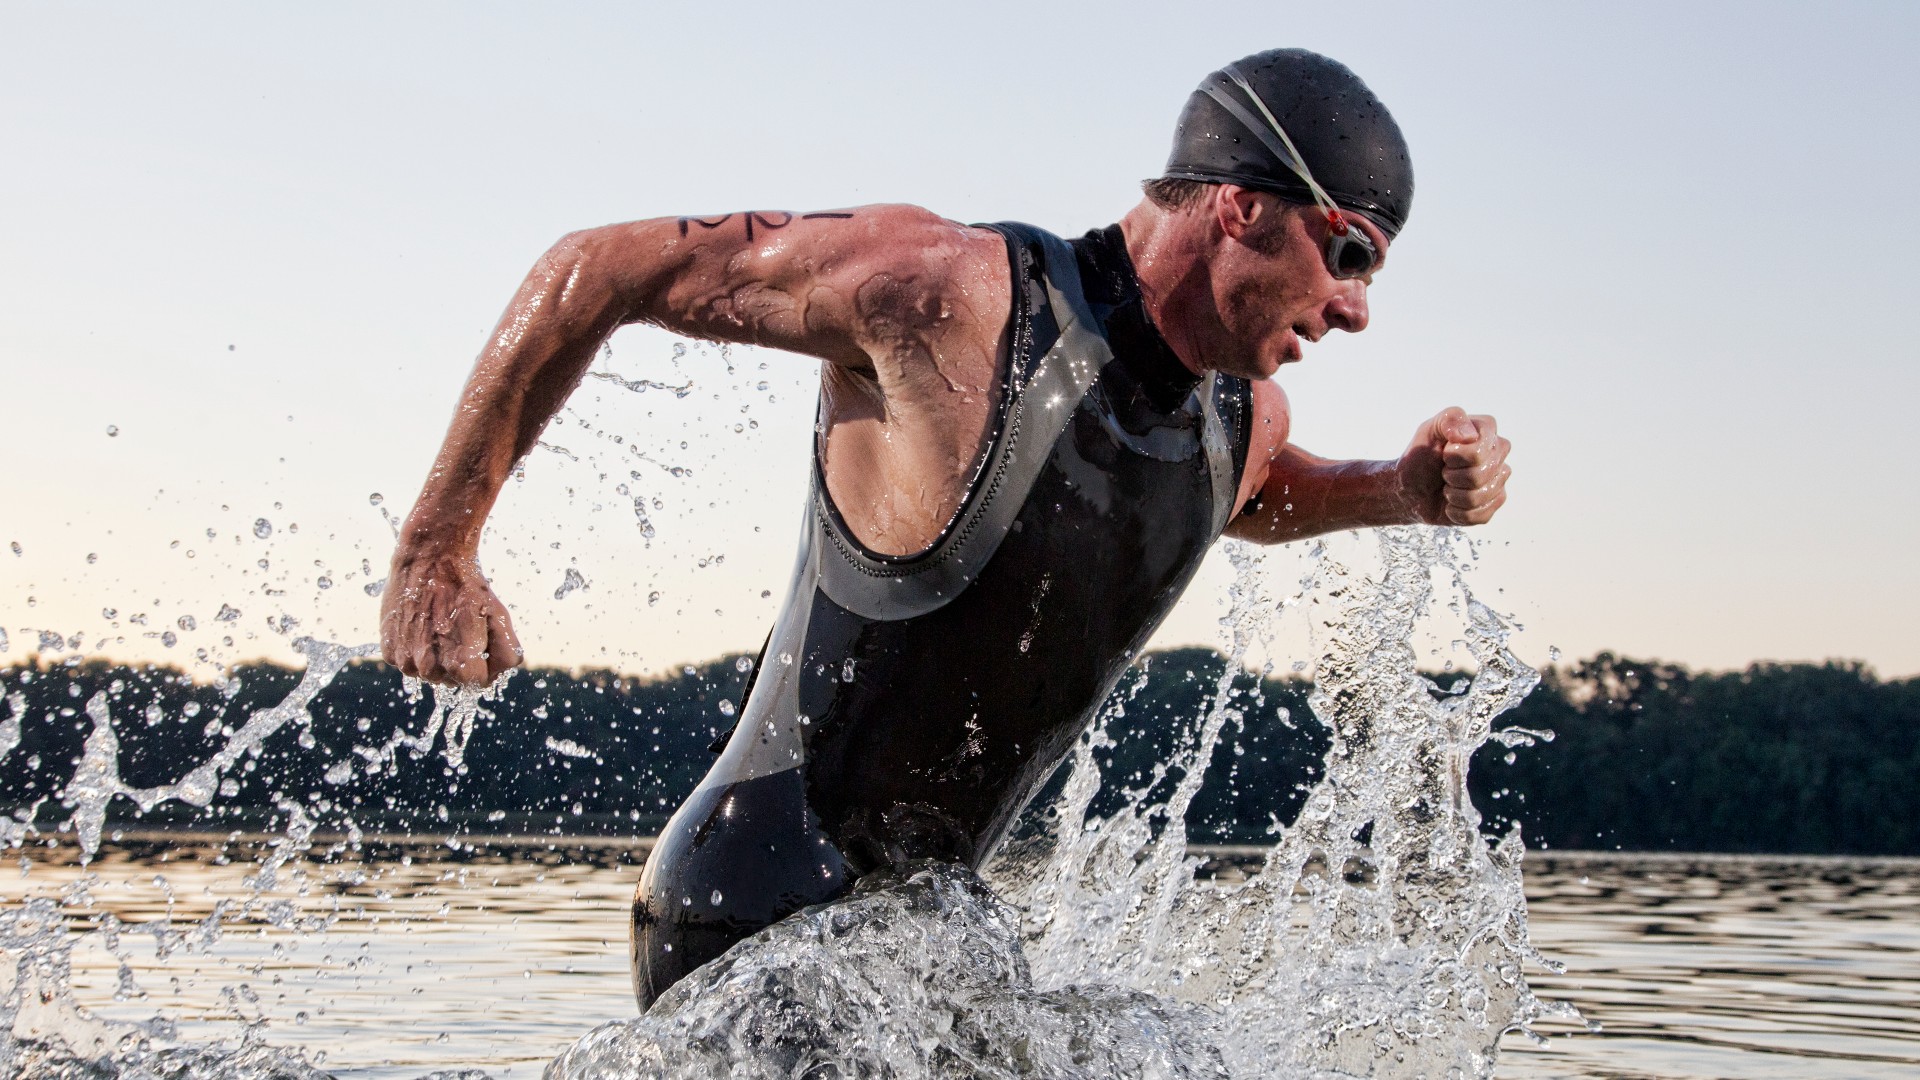 Swimming vs running: Which is best for you? | Live Science